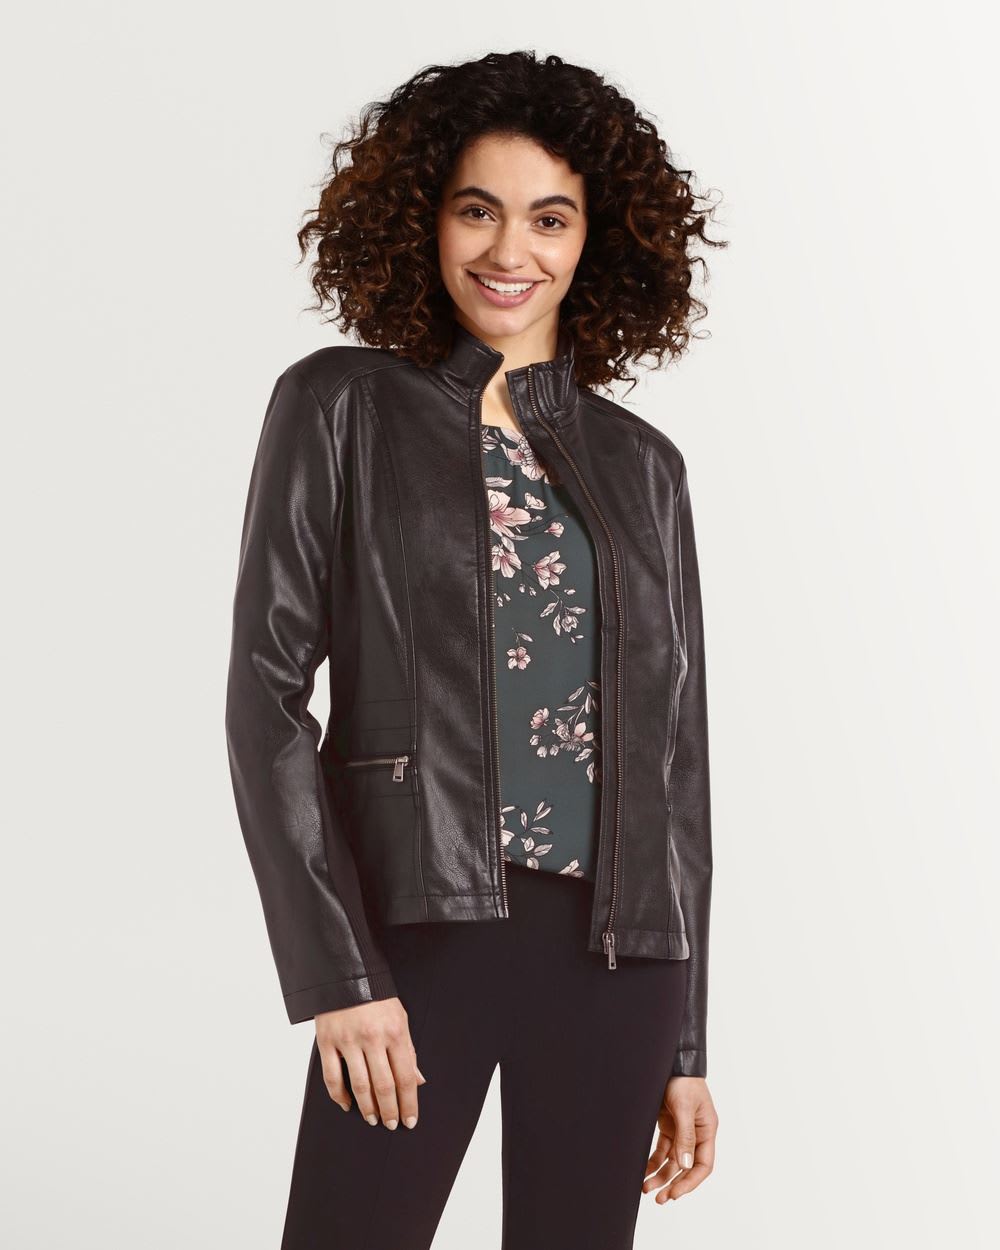 Faux Leather Biker Jacket with Ribbed Accents